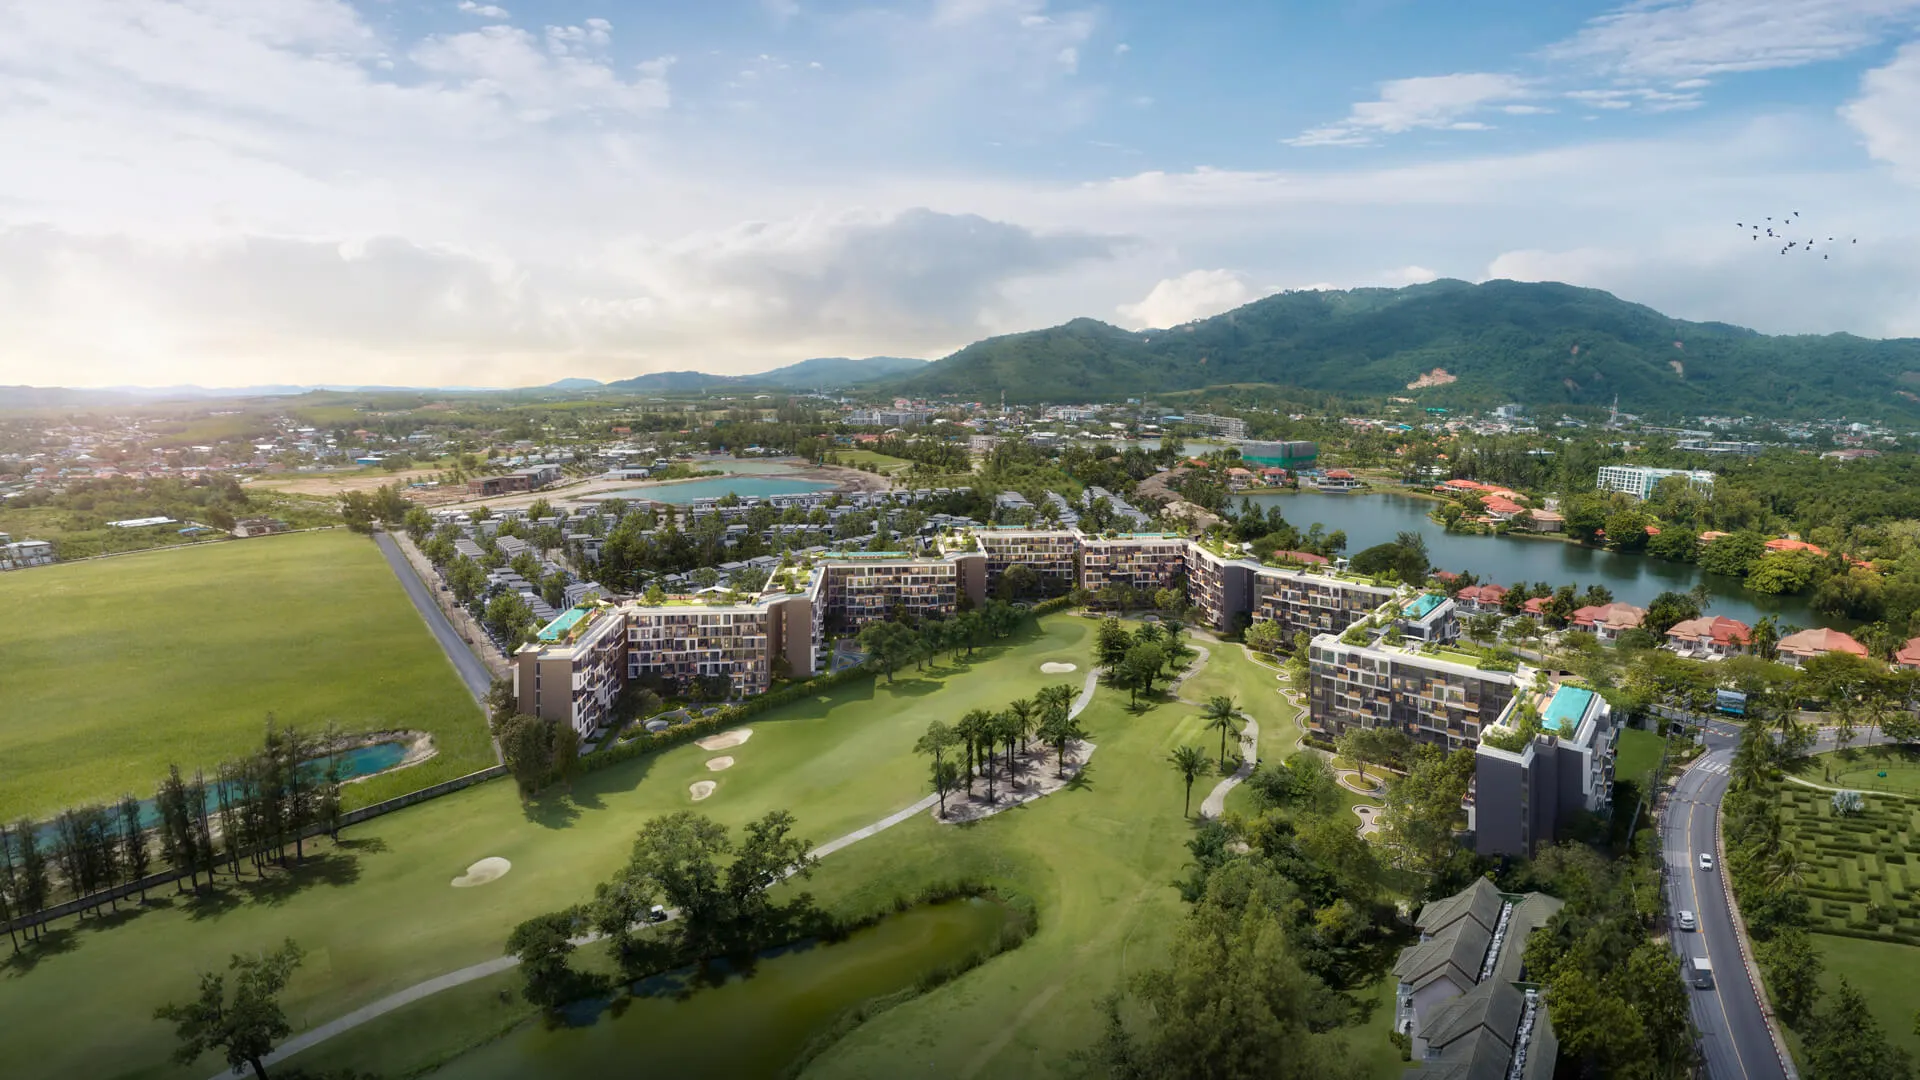 Skypark Celeste | An aerial view of a golf course surrounded by modern residential buildings, with a lake, roads, and distant mountains under a partly cloudy sky.